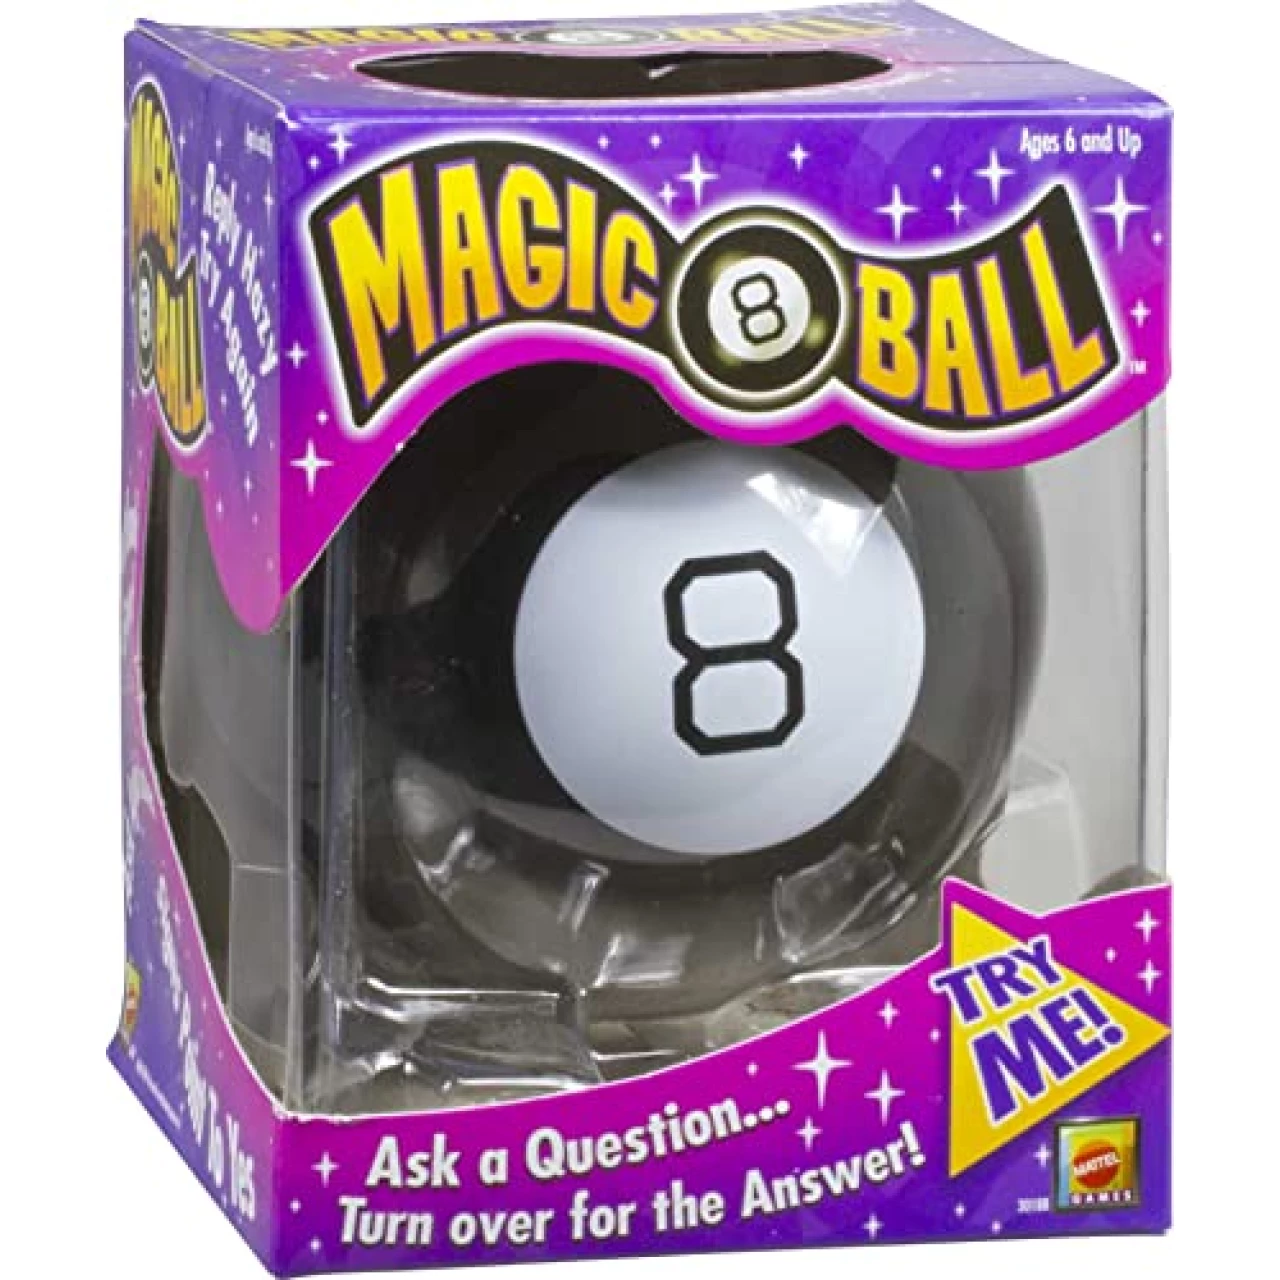 Mattel GamesMagic 8 Ball Toys and Games, Original Fortune Teller Ball, Ask A Question and Turn Over for Answer